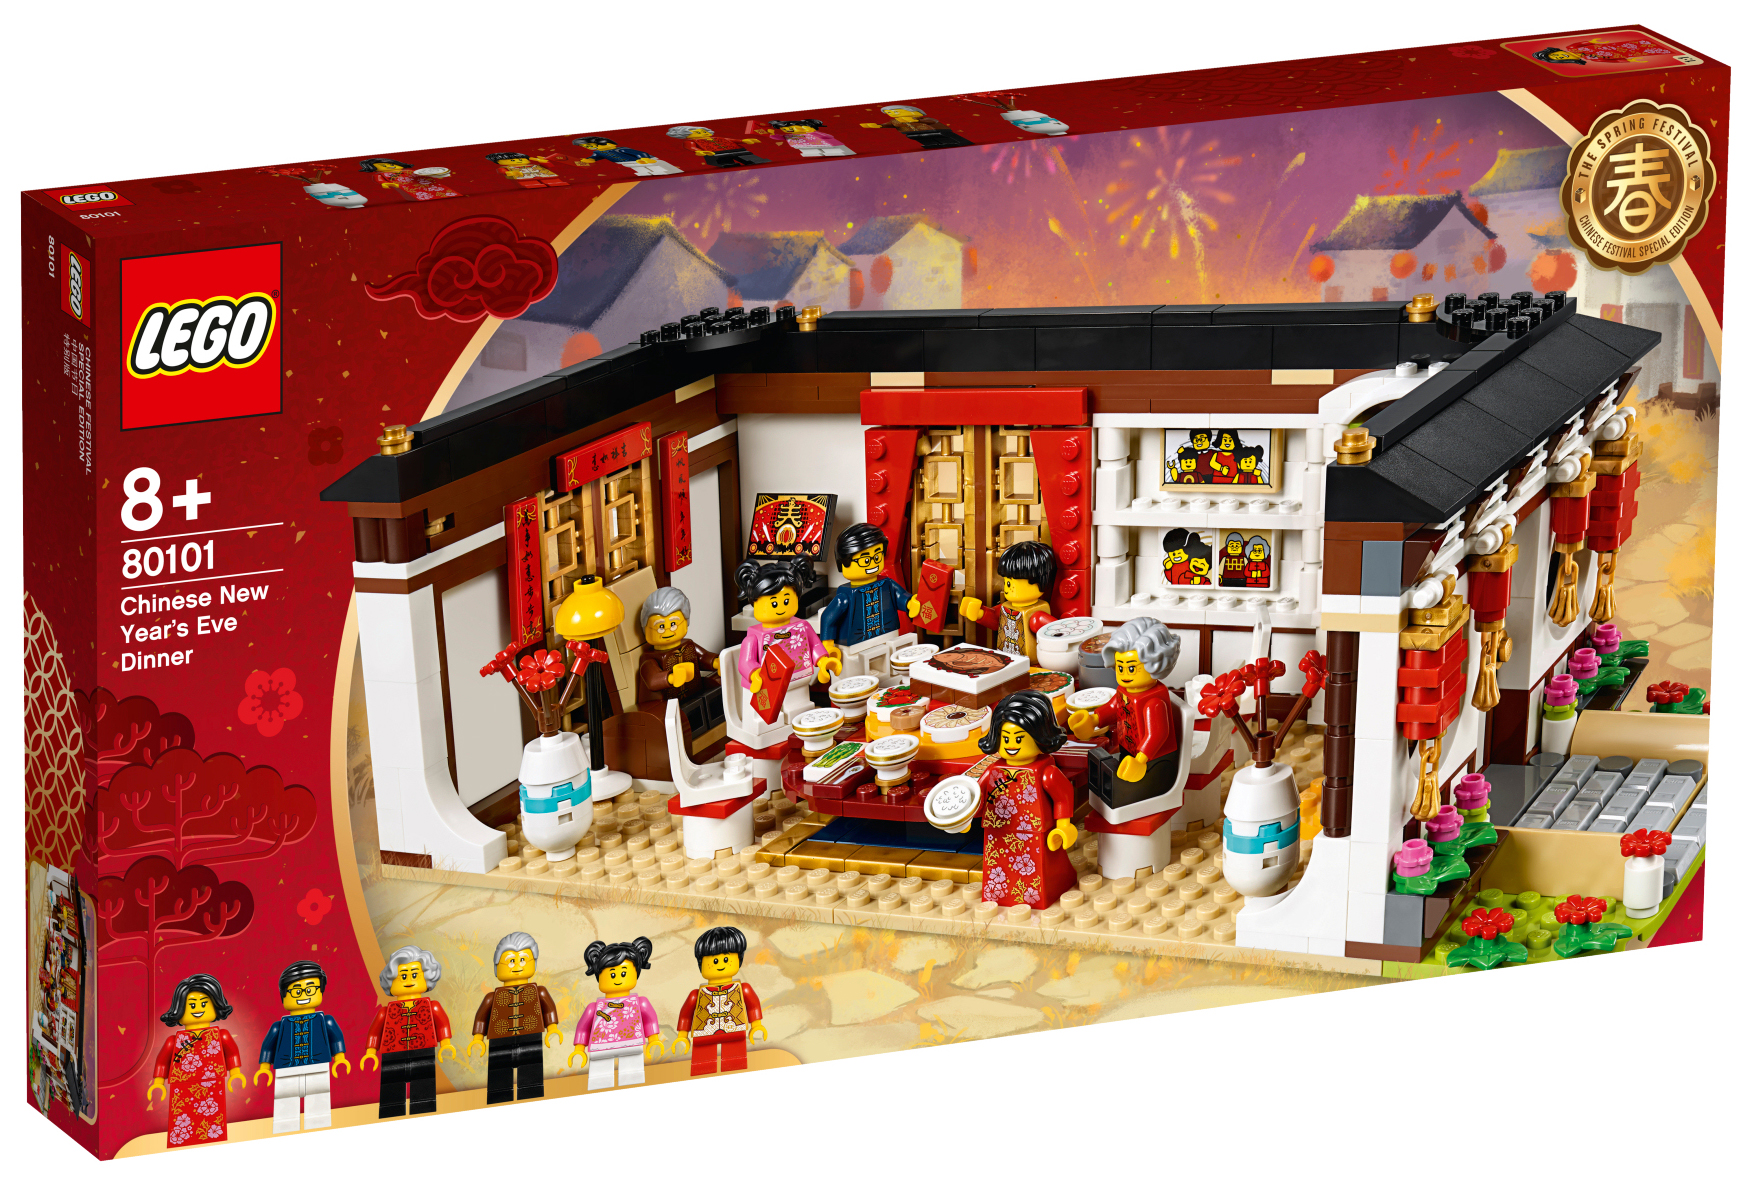 REVIEW LEGO 80101 Chinese New Year's Eve Dinner HelloBricks